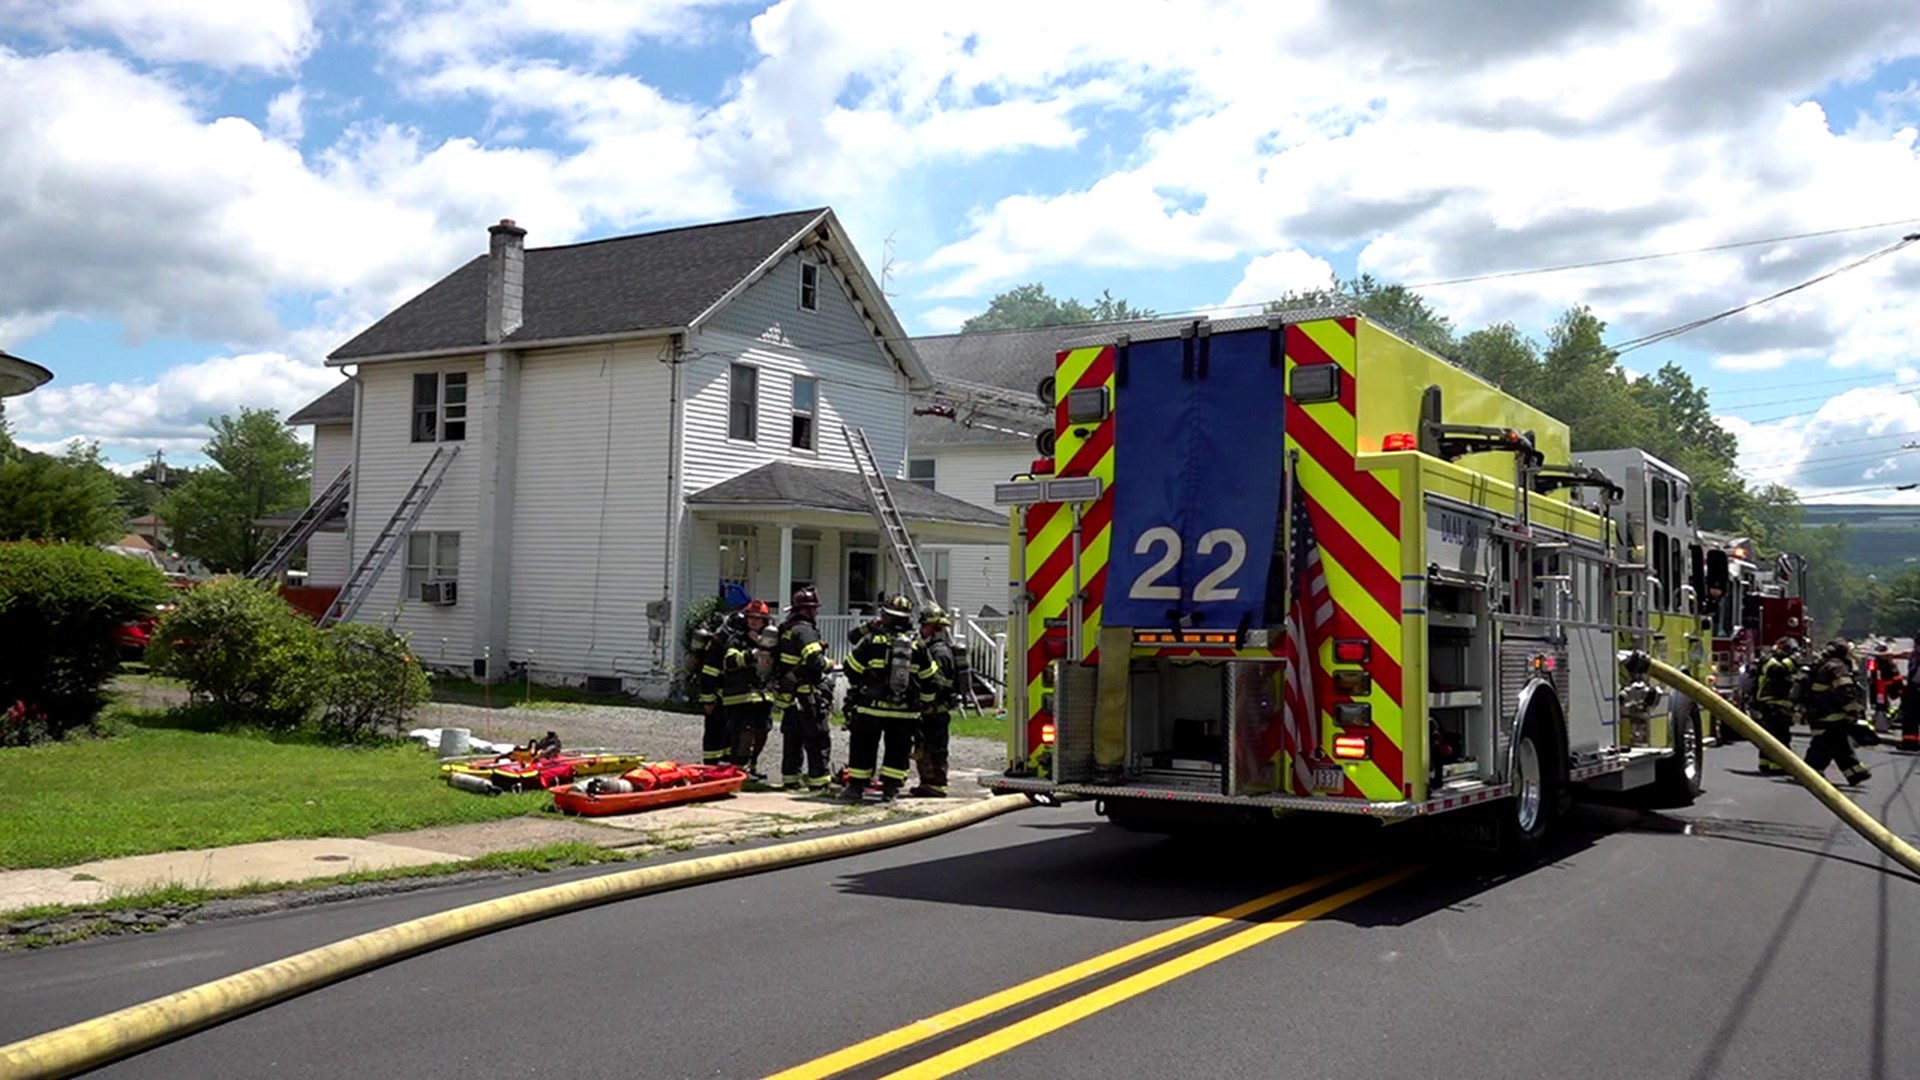 Flames sparked at a home along Keystone Avenue in Blakely just before 12 p.m. Sunday.